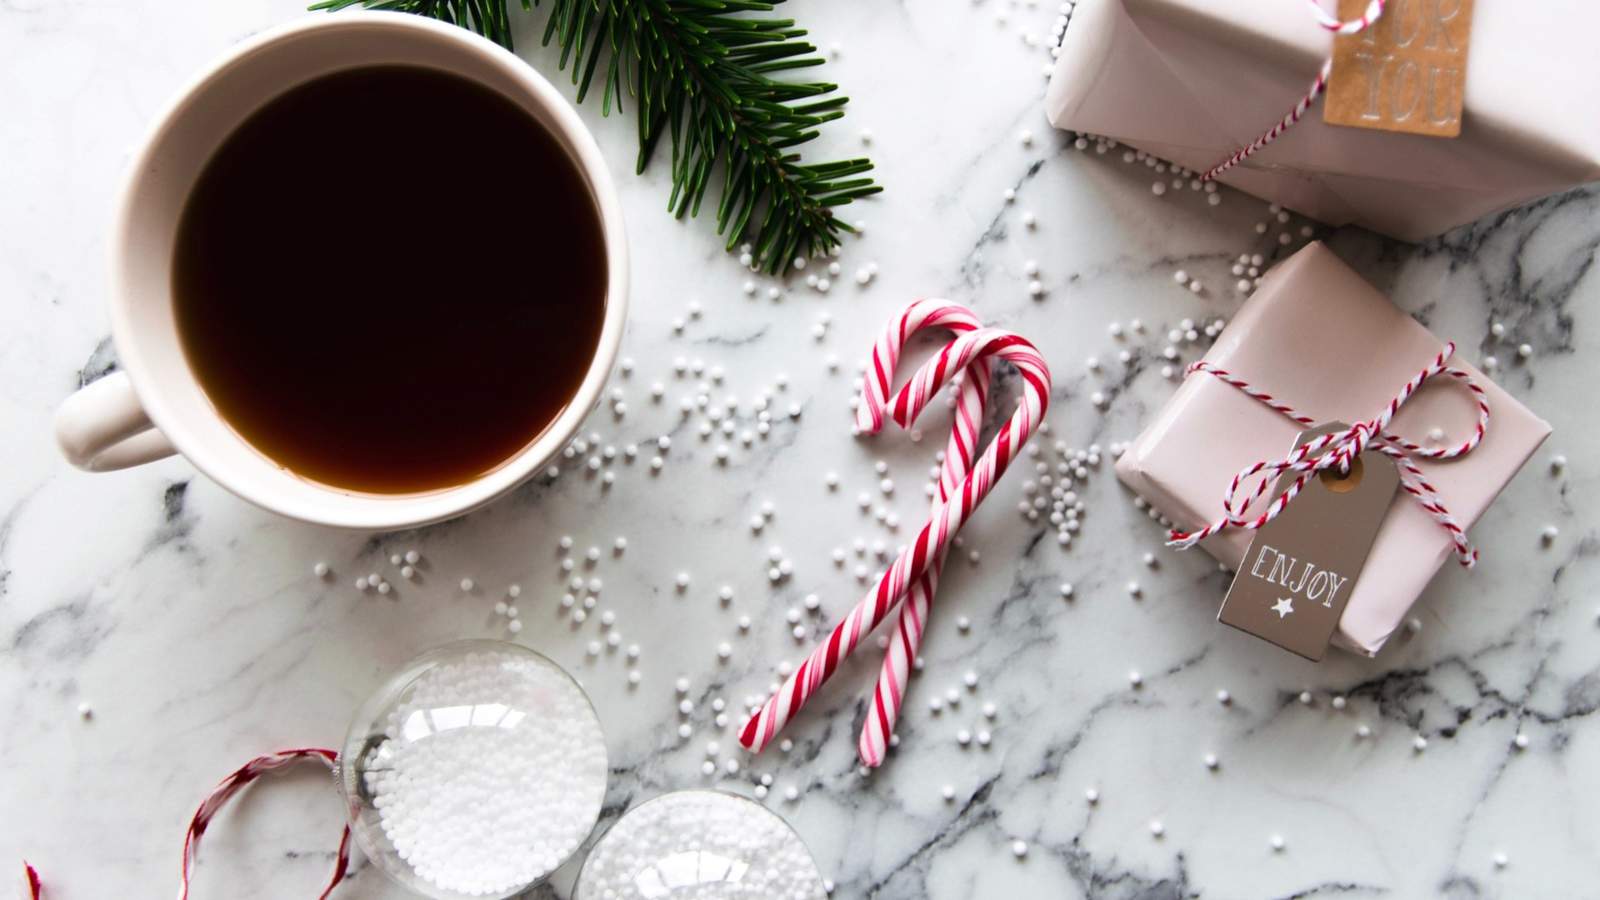 Here’s a holiday twist for your morning coffee